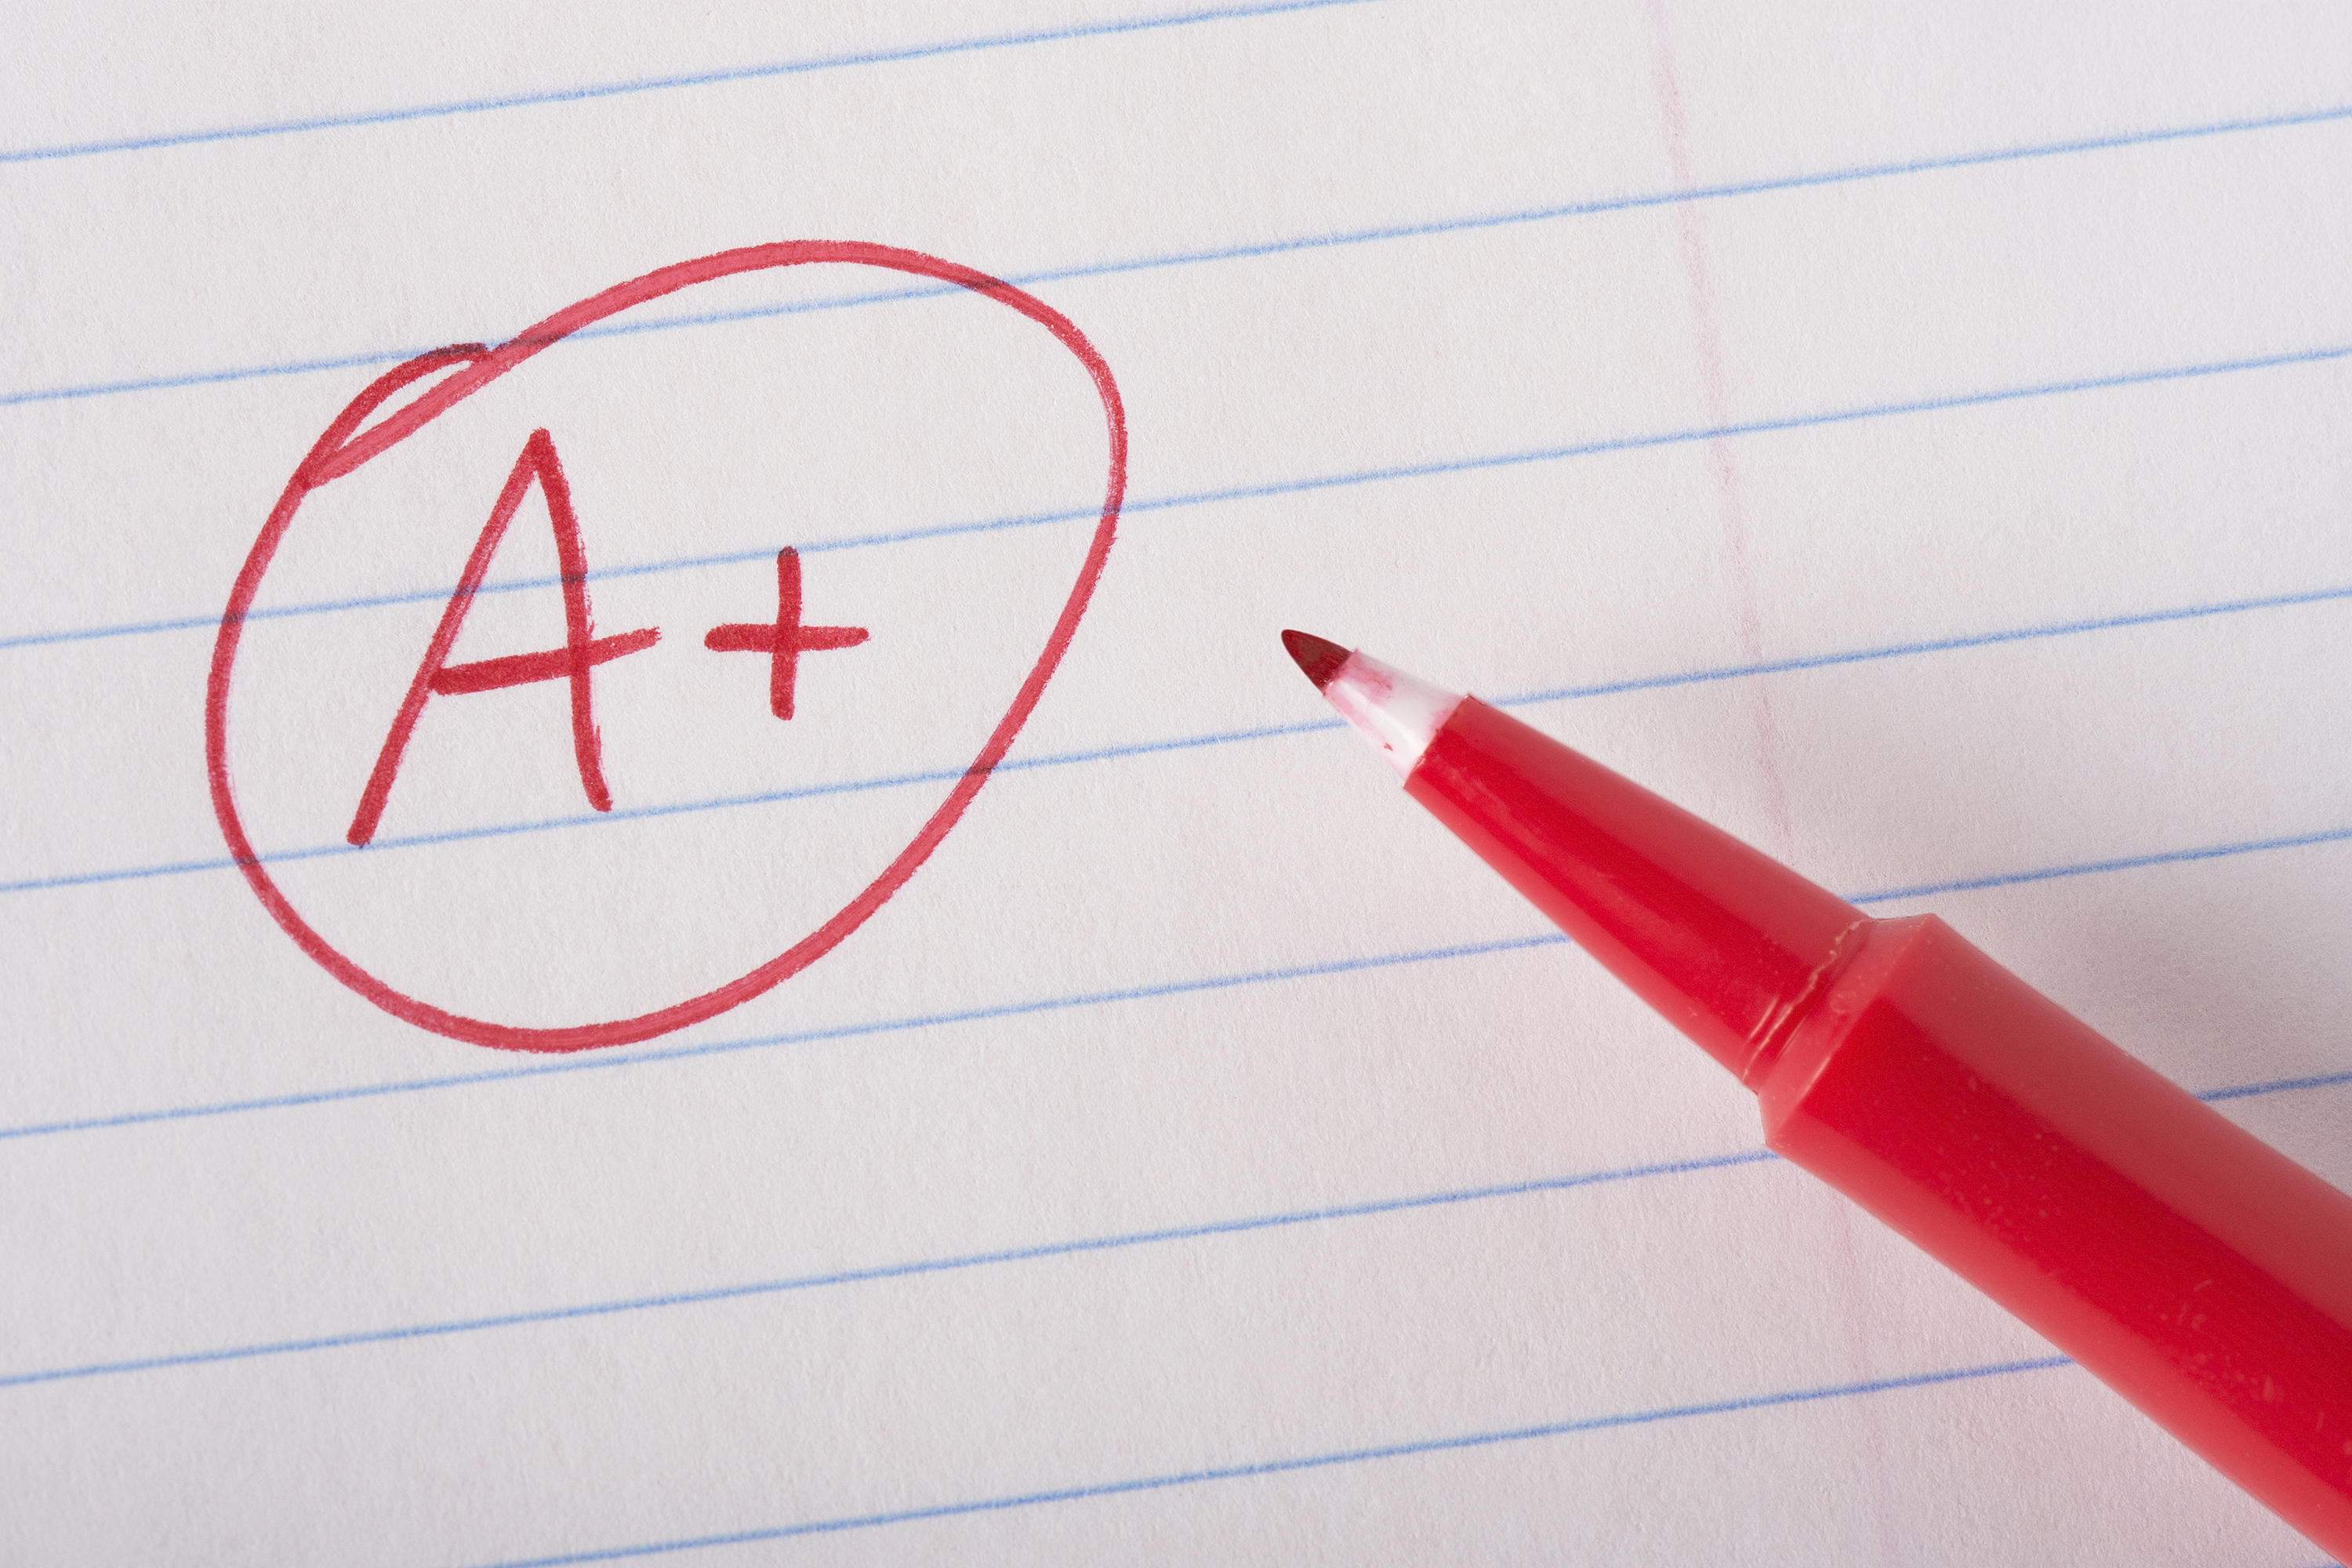 Are you an A+ or not so much?